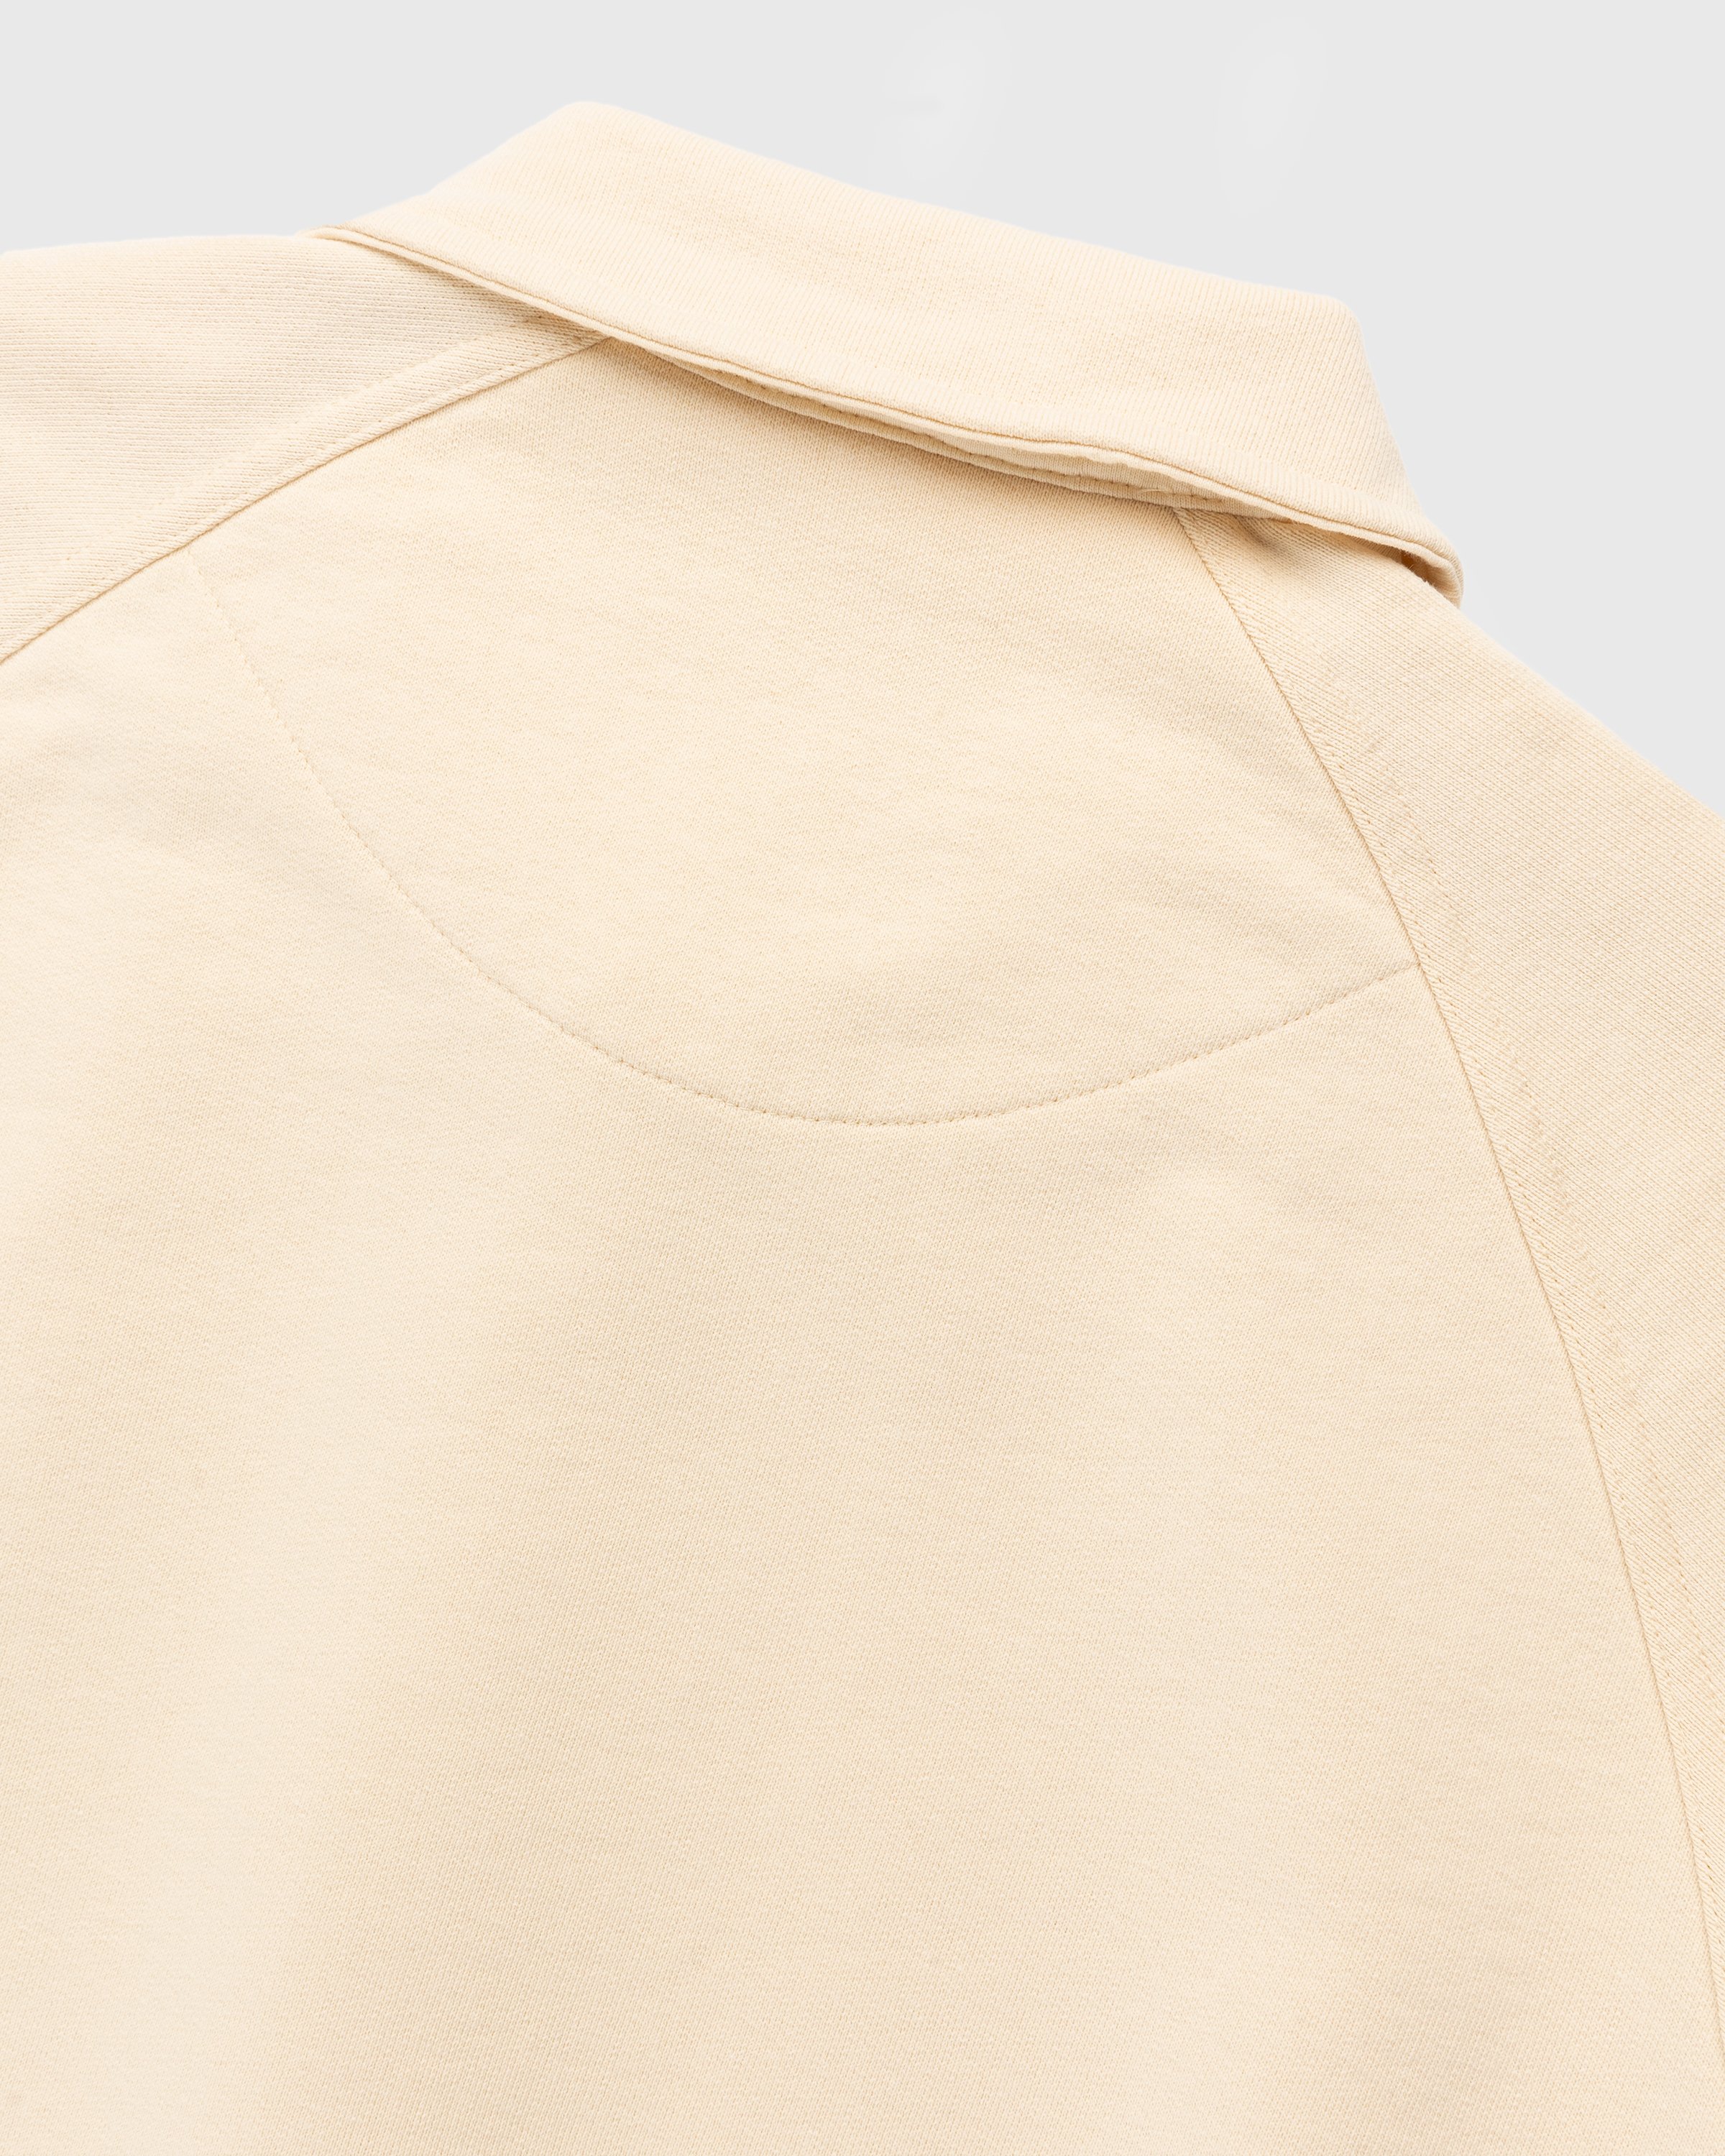 Diomene by Damir Doma - Heavy Jersey Polo Cloud Cream - Clothing - Beige - Image 4